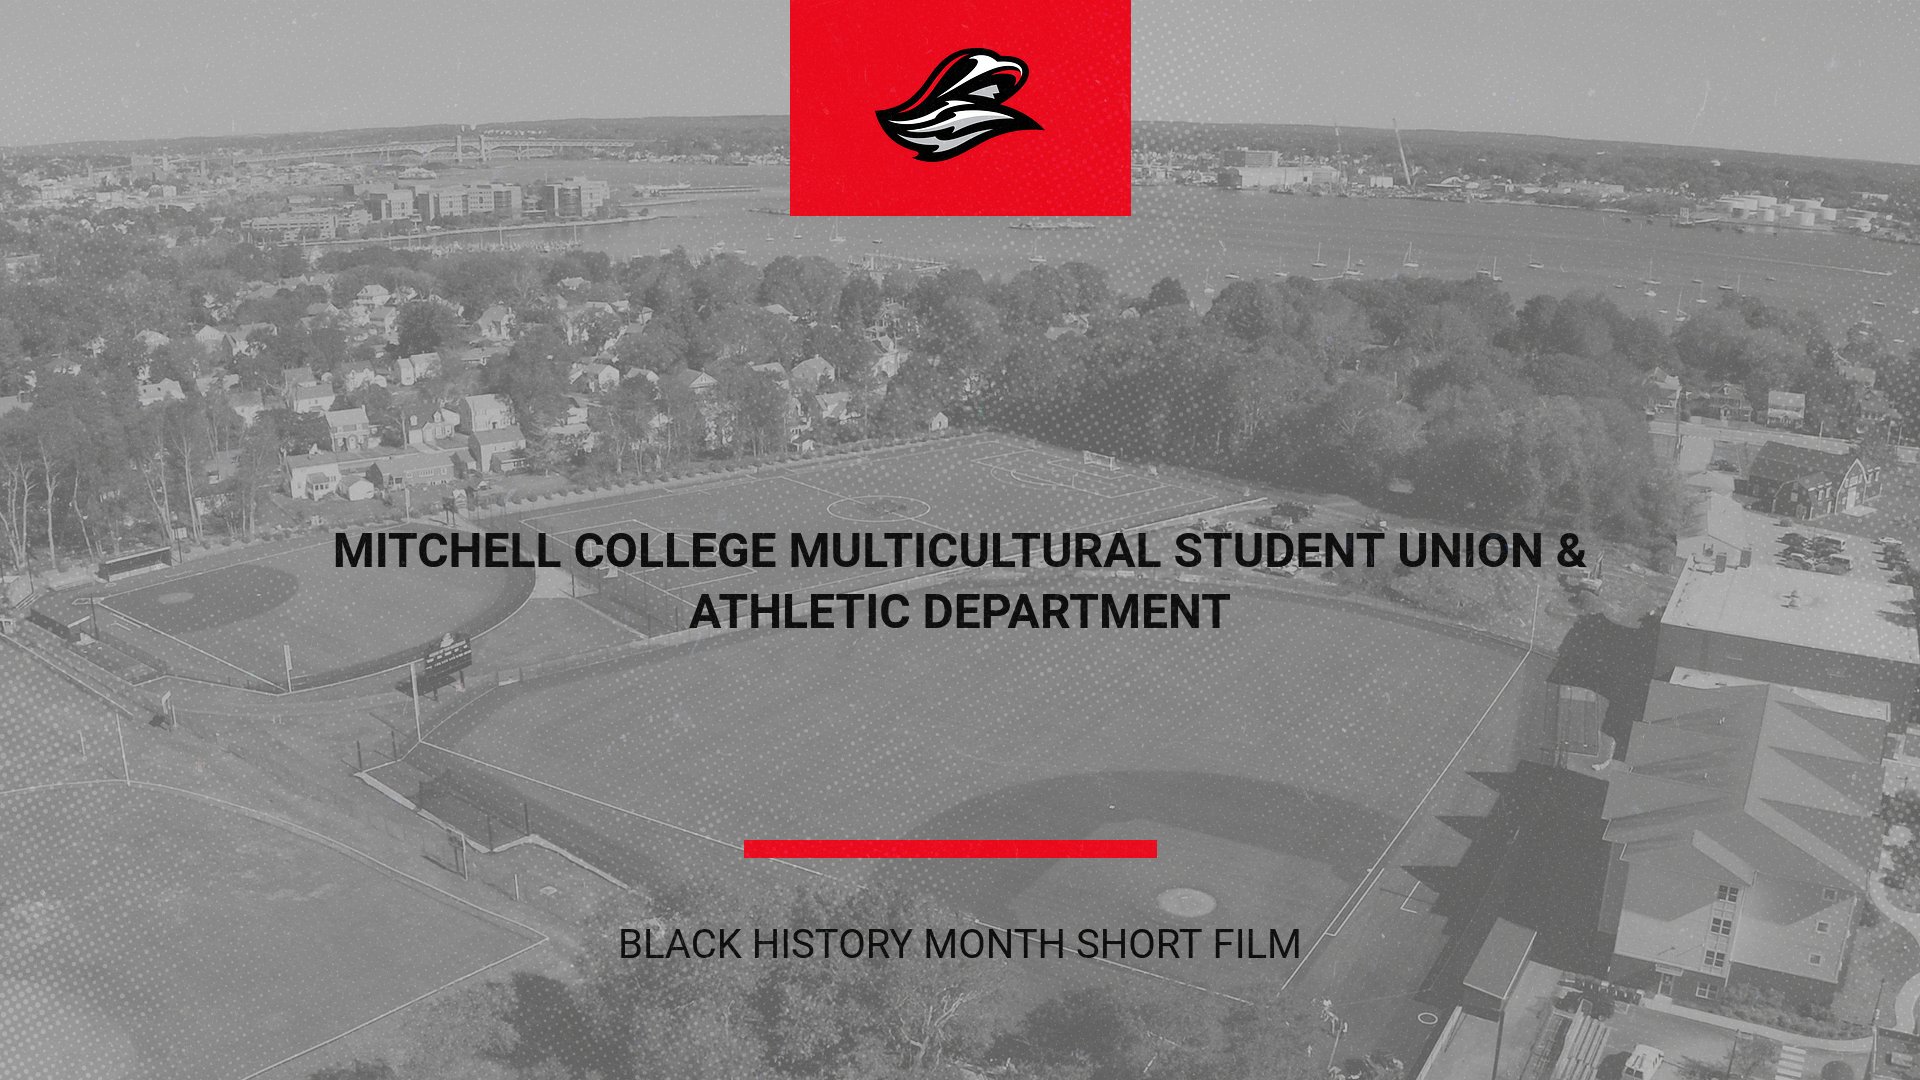 Mitchell College Multicultural Student Union & Athletic Department Release Black History Month Short Film